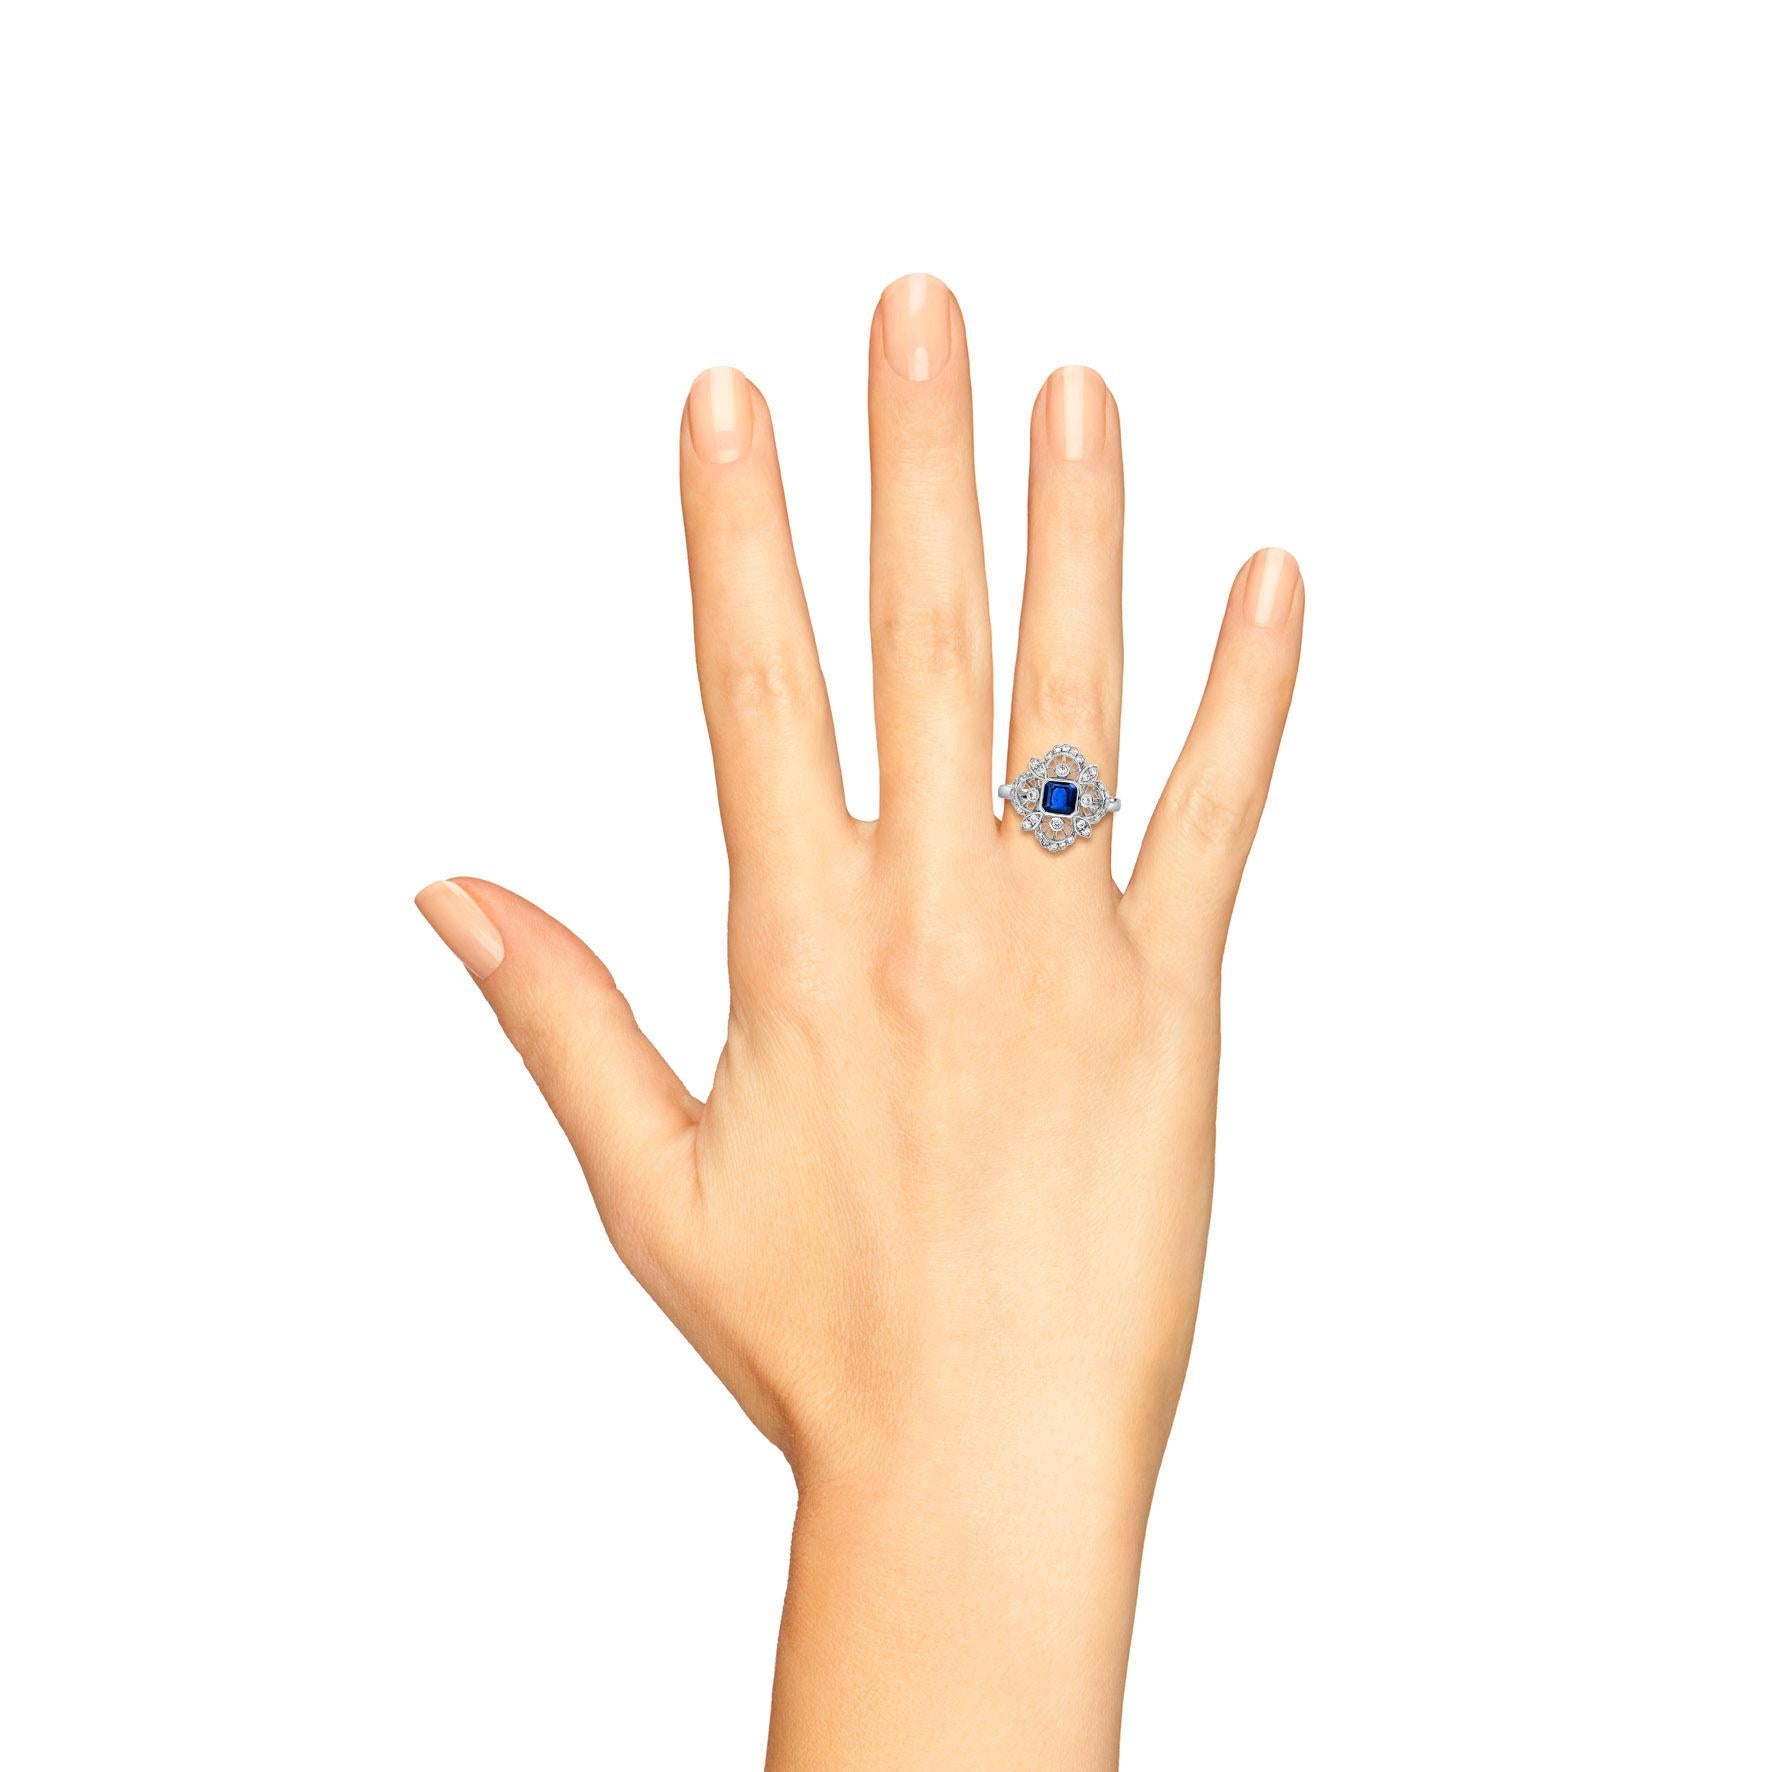 This gorgeous open work ring is centered with a 1 carat octagon shape blue sapphire in a bull bezel setting. The center is accented with 32 round diamonds. The ring is beautifully crafted in 14k white gold. It sits low on the finger and is